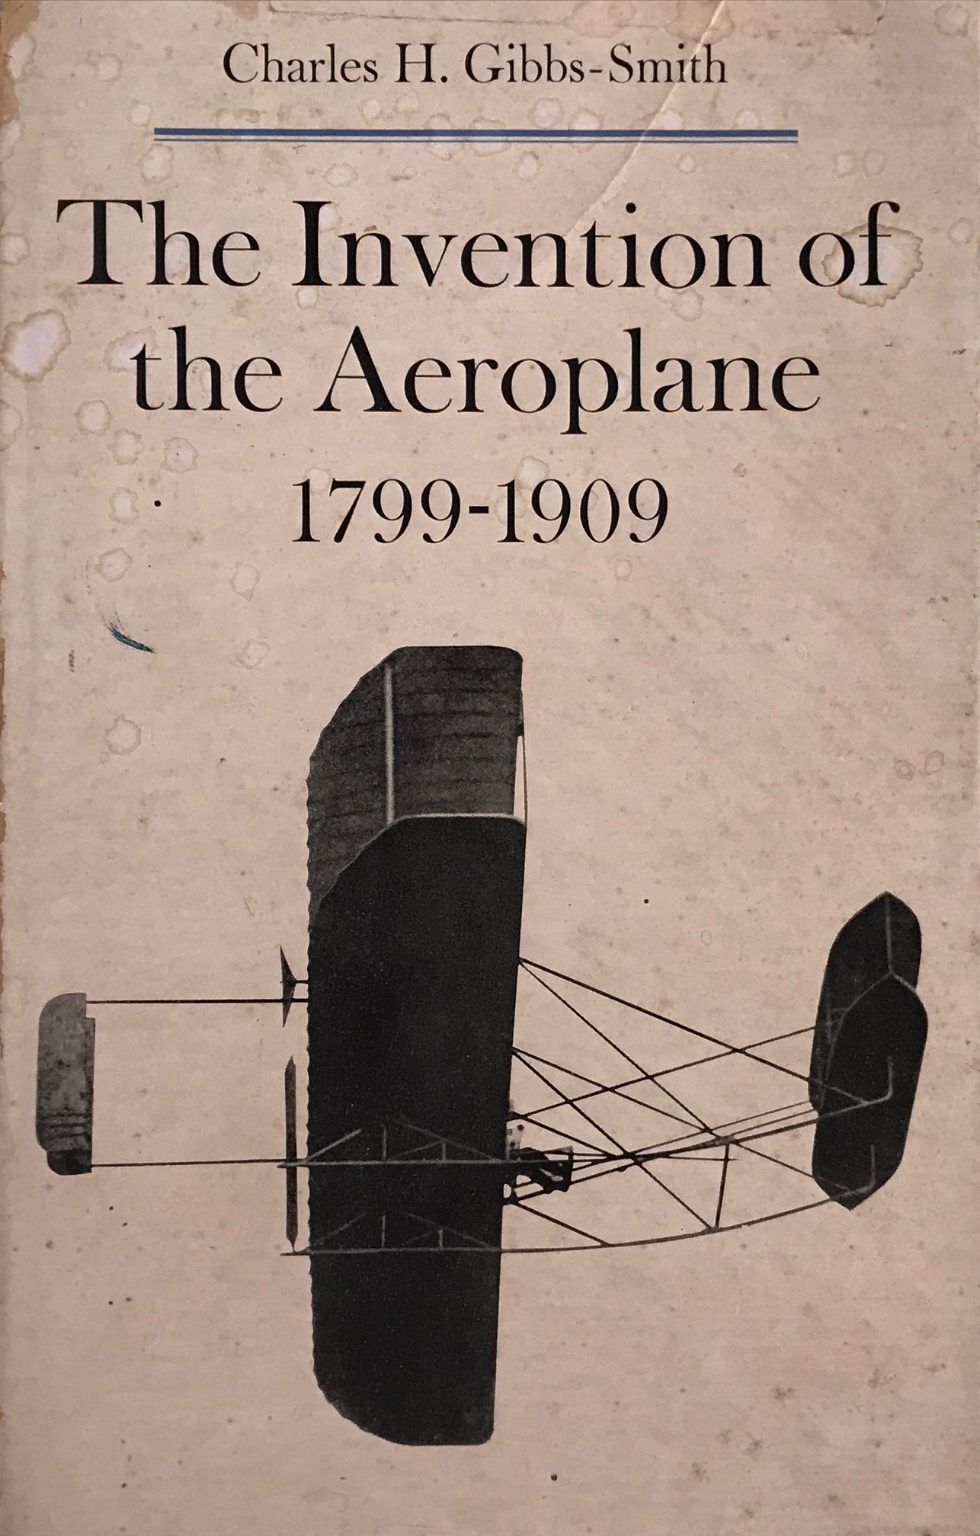 THE INVENTION OF THE AEROPLANE 1799-1909